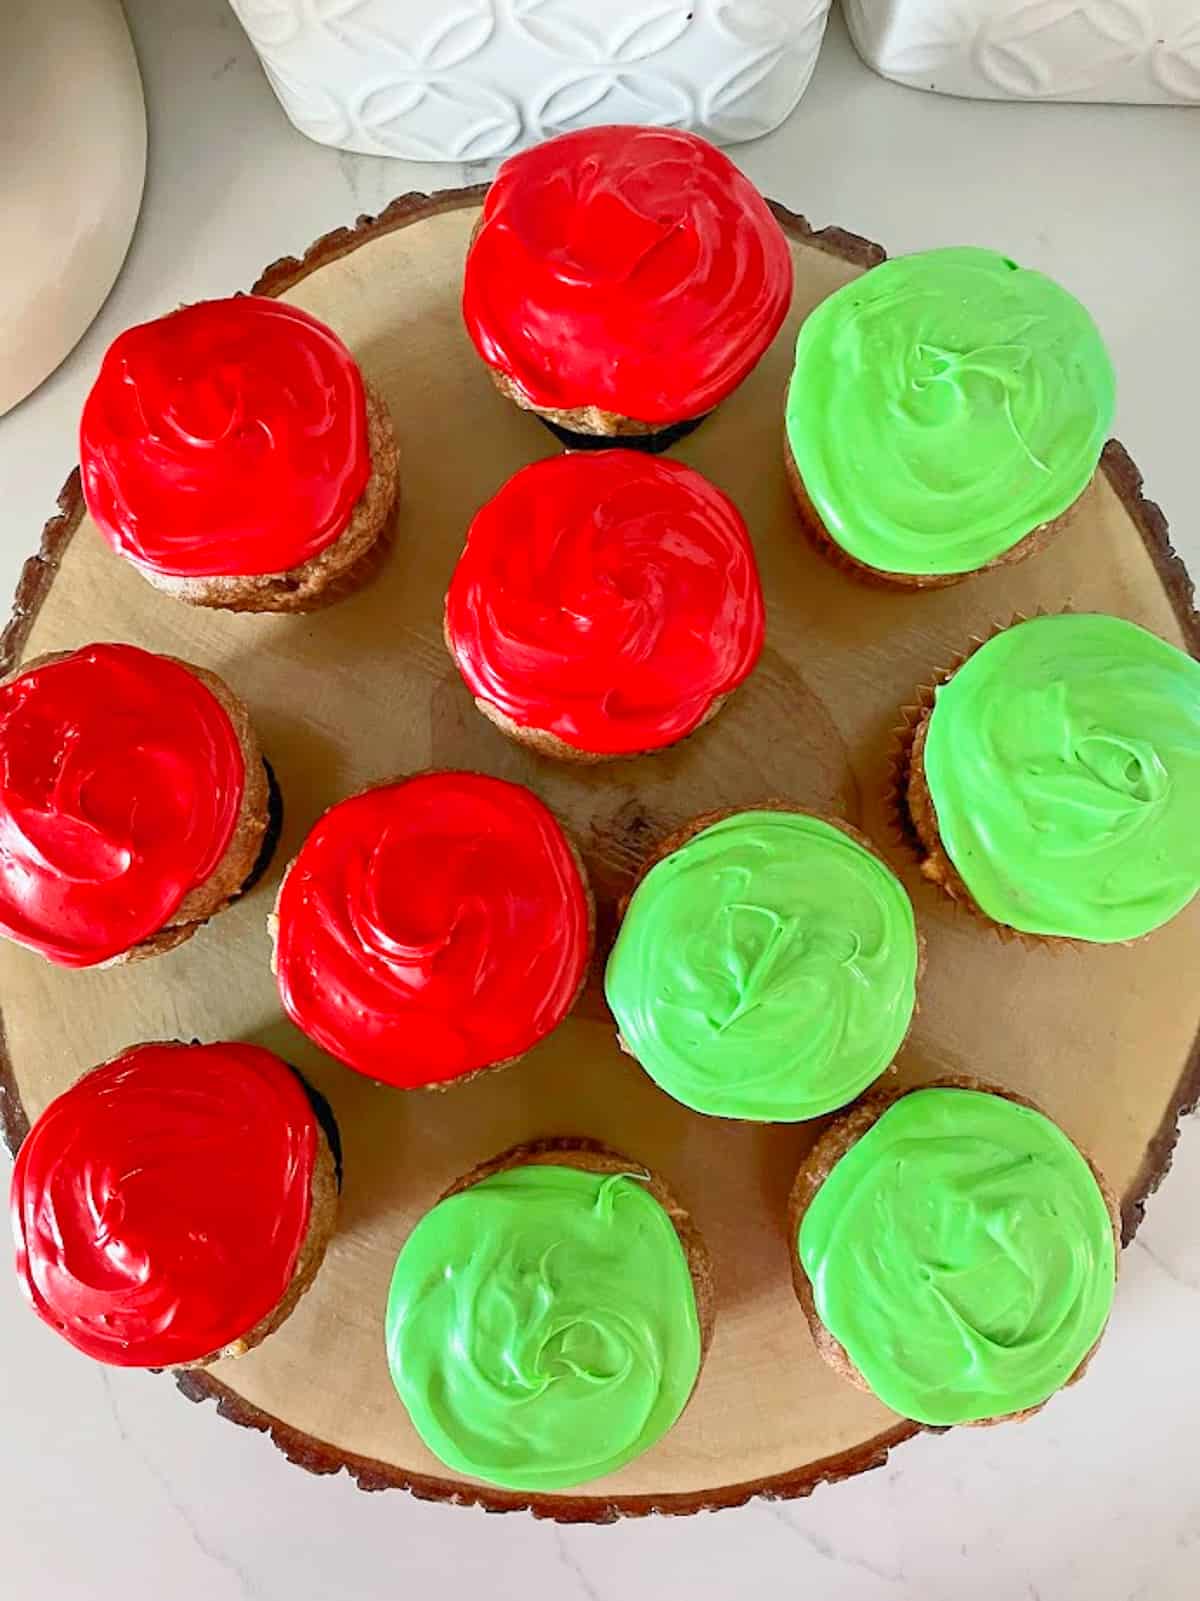 Caramel Apple Cupcakes recipe salted buttercream frosting